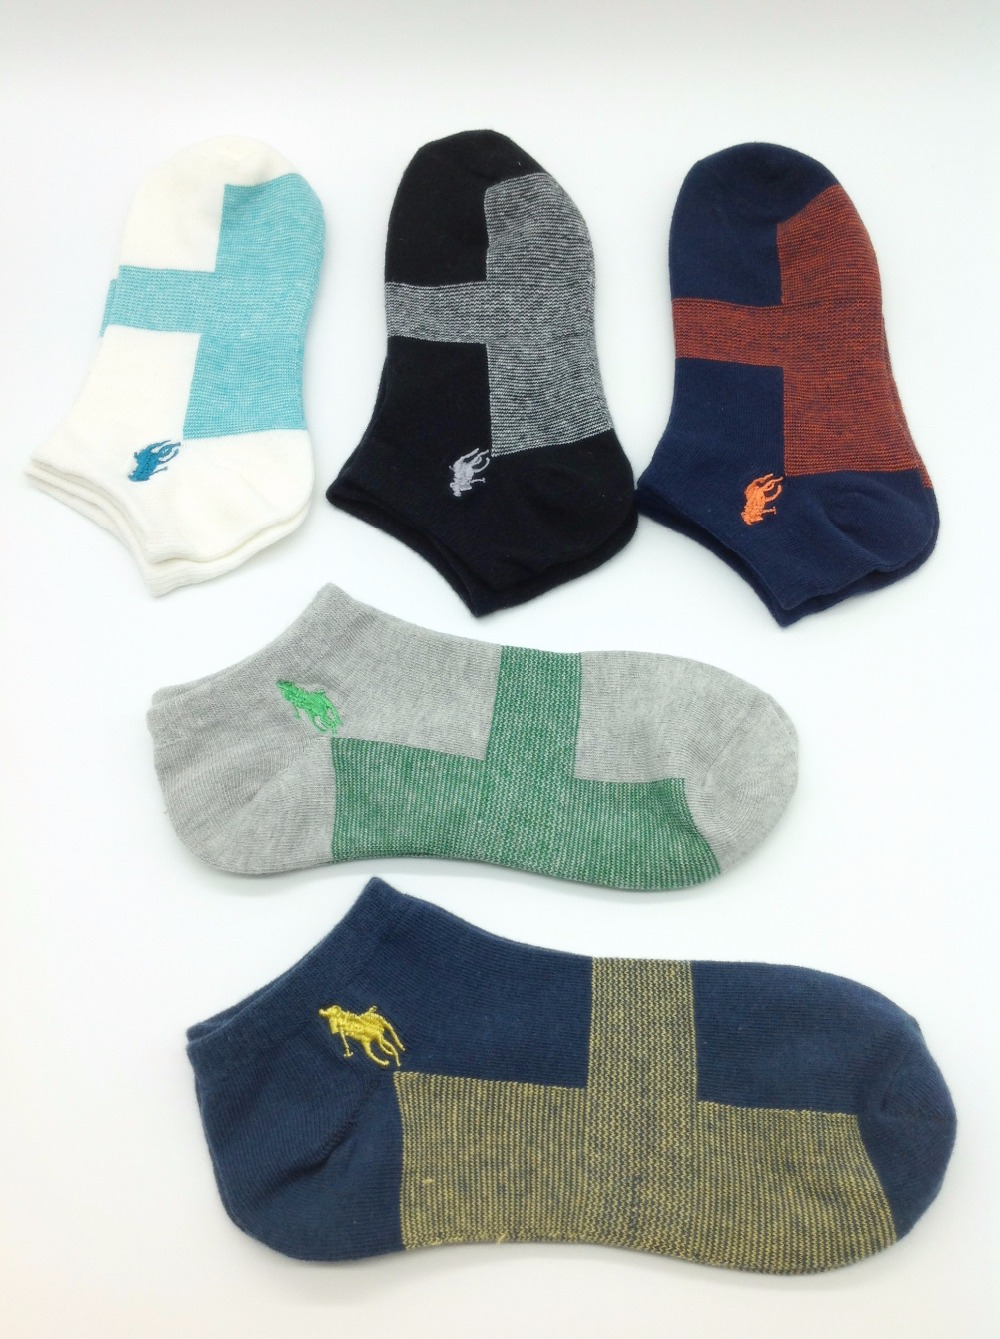 Image of New Arrival men Socks high quality Men's Polo Socks Brand Sport cotton Sock 5 color 10pieces=5pairs=lot,Free Shipping